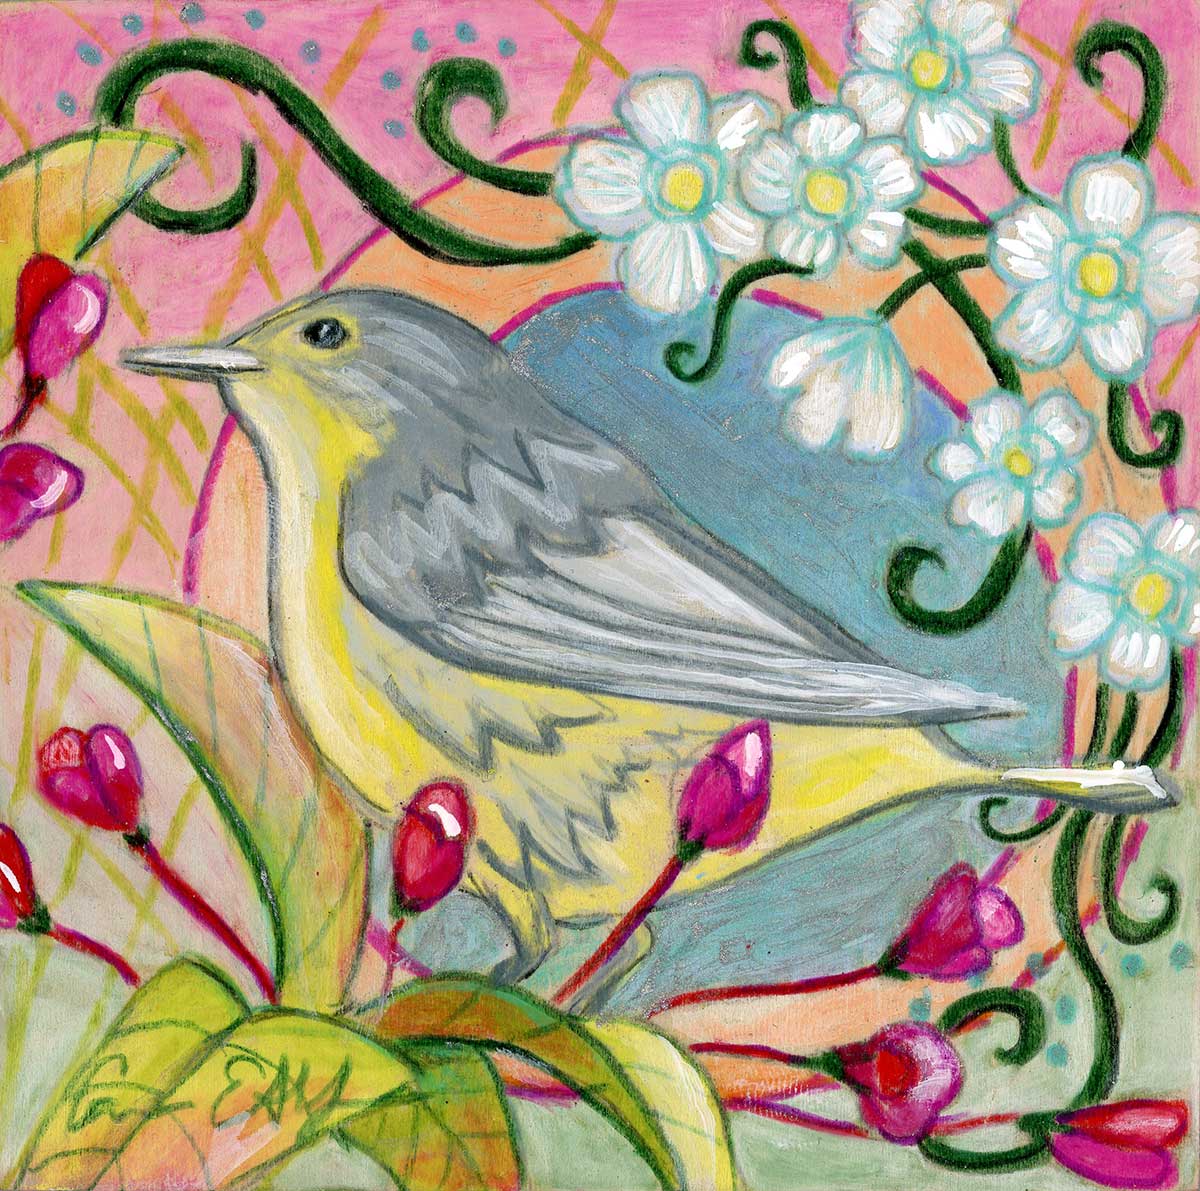 SOLD - "Warbler", 4" x 4", mixed media